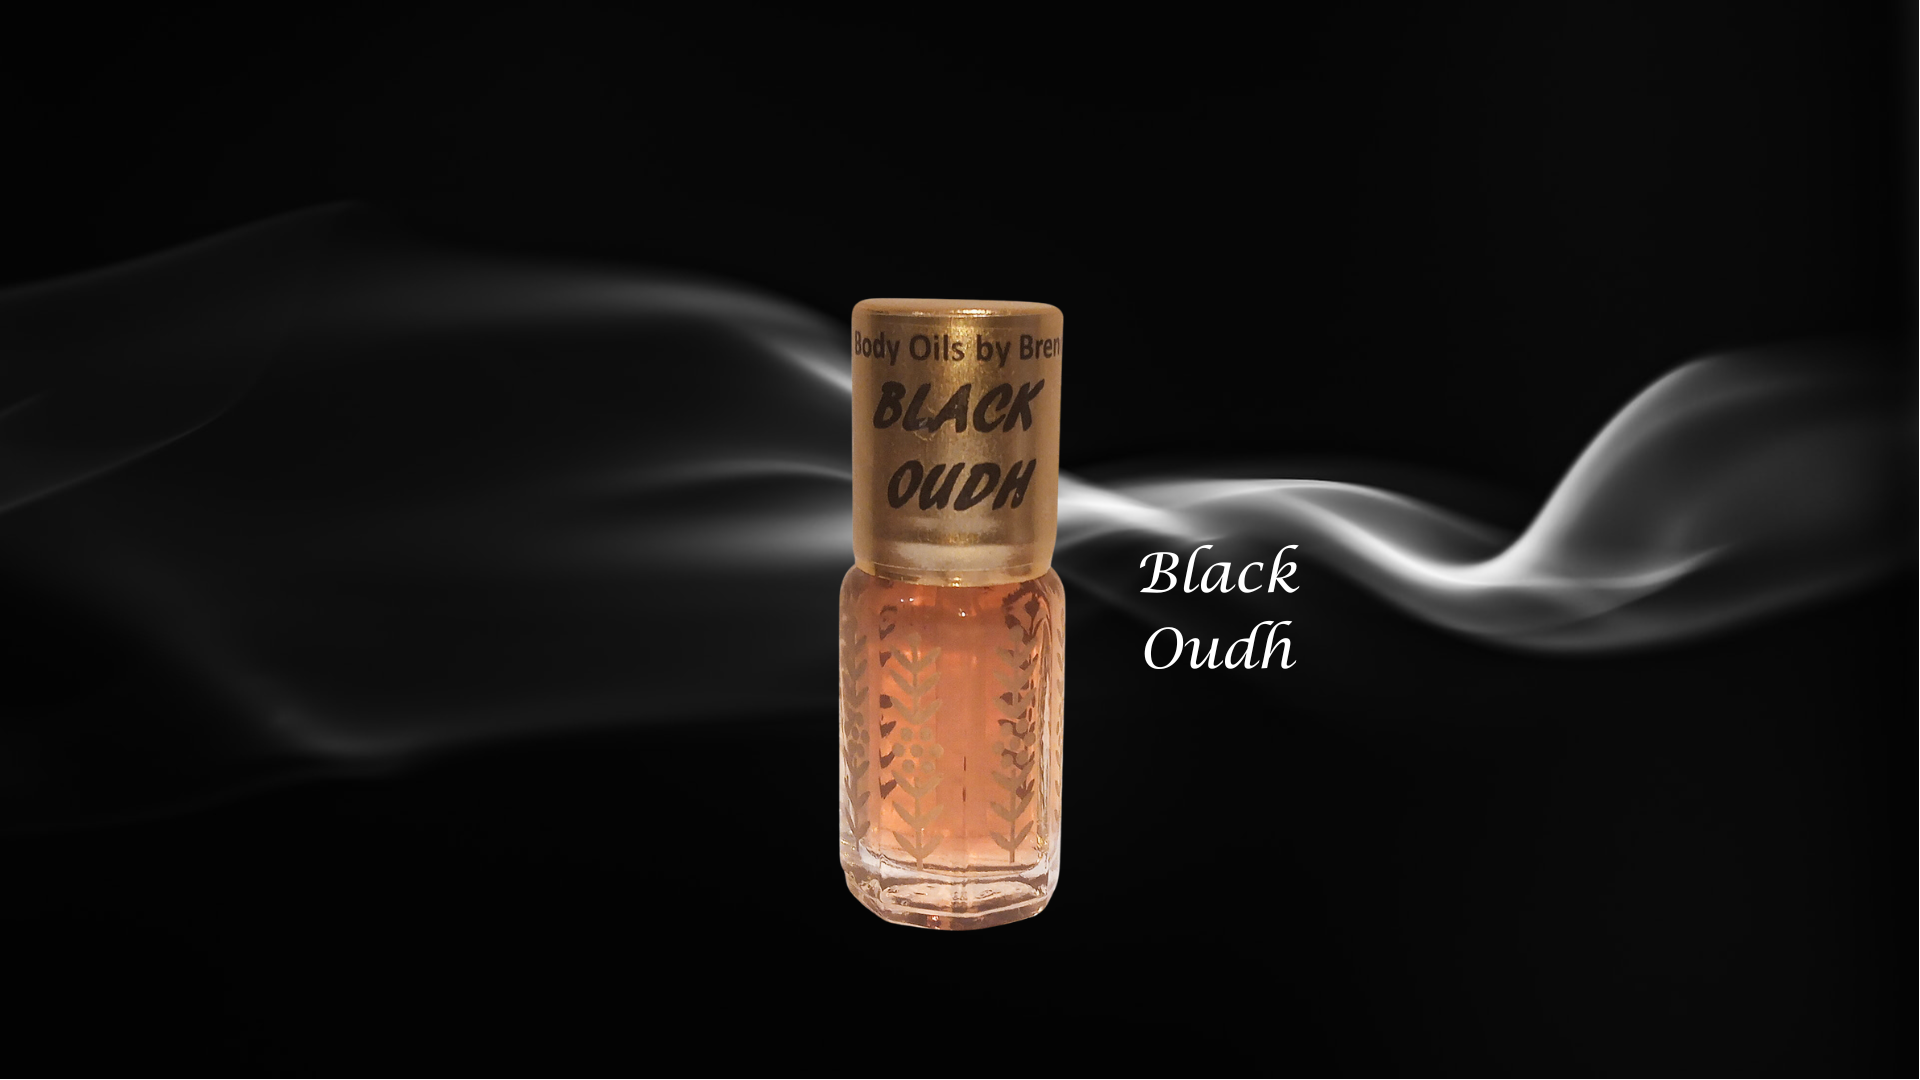 Black OUDH Best Selling Attar - No Alcohol - Agarwood Oil - All Natural  Perfume -OUD Premium Oil - Concentrated Perfume Oil - Ittar - Unisex